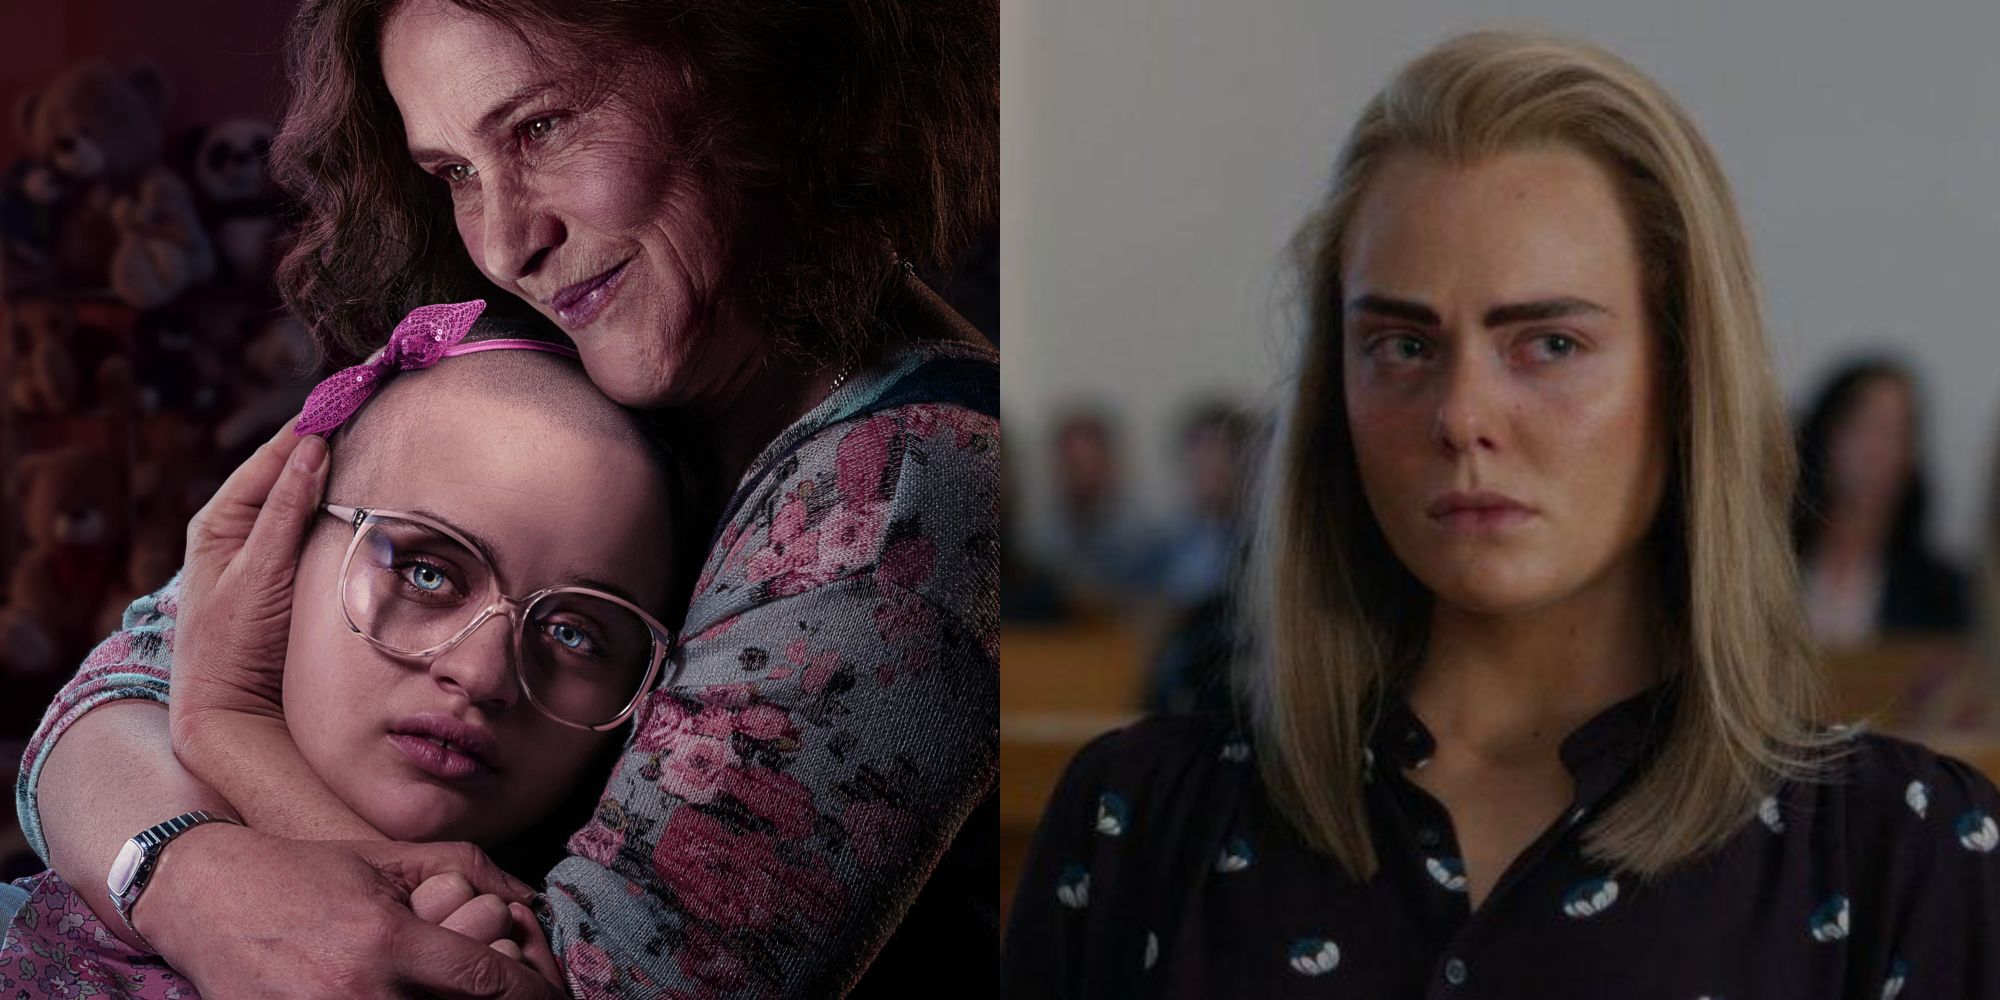 Split image showing the main characters from The Act and The Girl from Plainville.